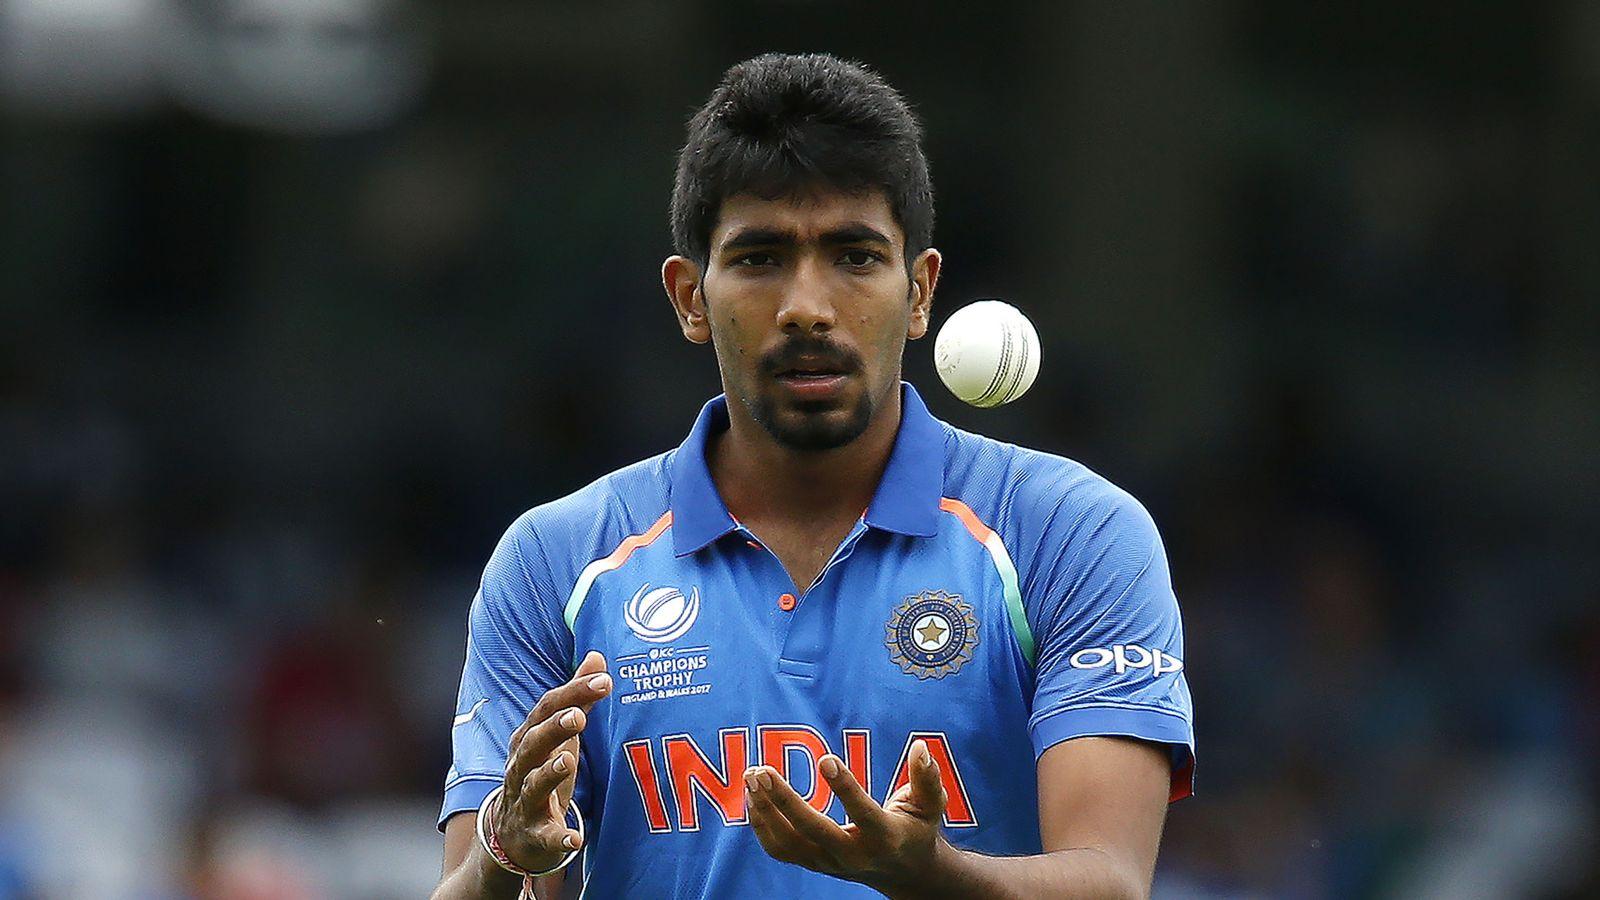 Jasprit Bumrah Earns Maiden India Test Call Up Ahead Of South Africa